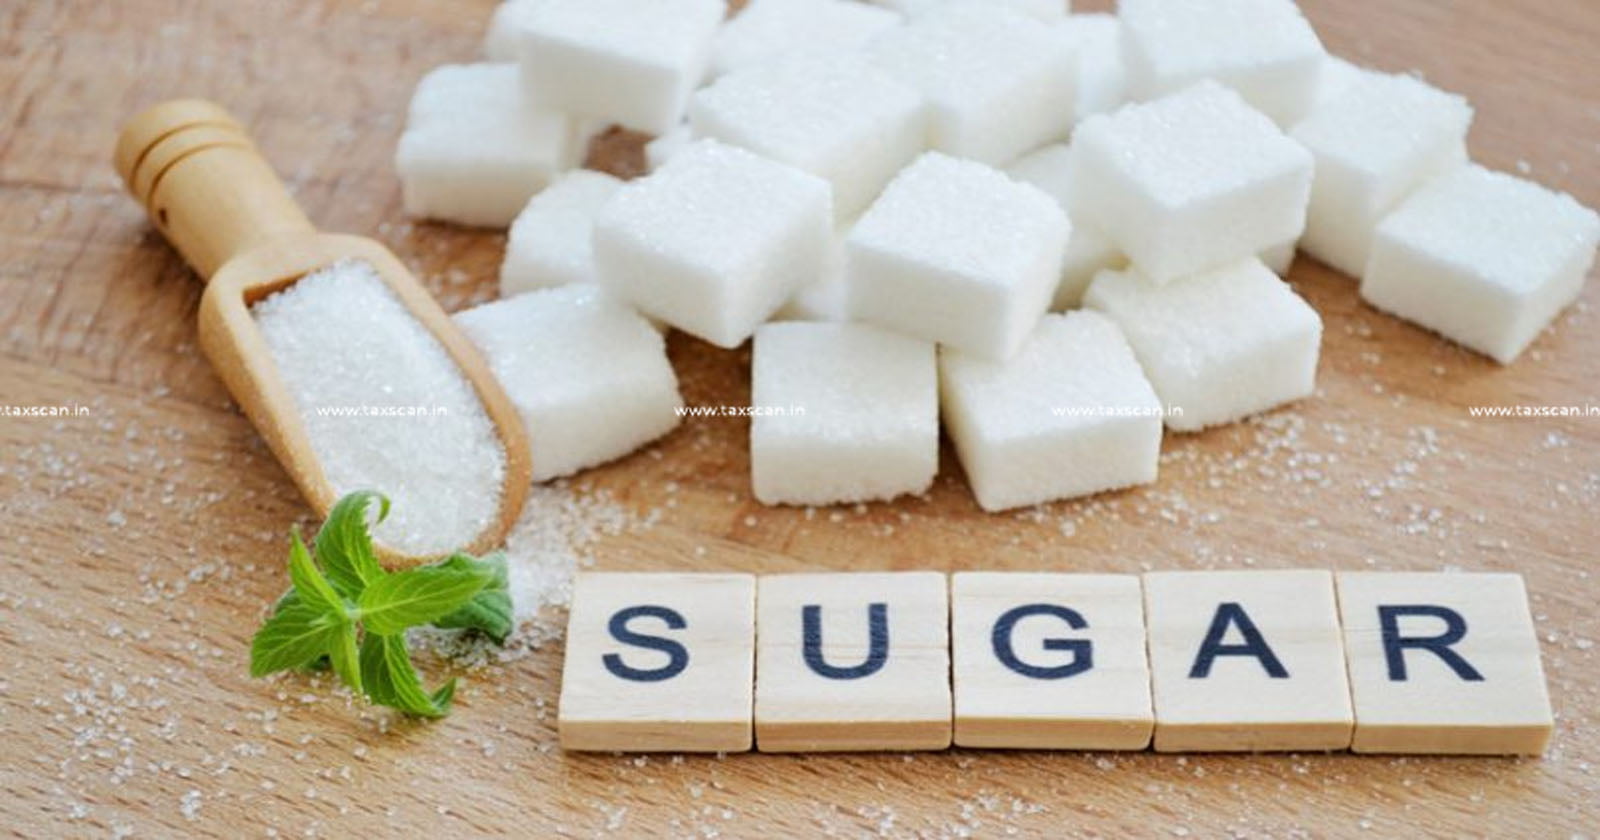 Refund Claim of Sugar Cess Rejected based on Pending Order of Higher Authority - CESTAT sets aside Rejection Order in Absence of Evidence -